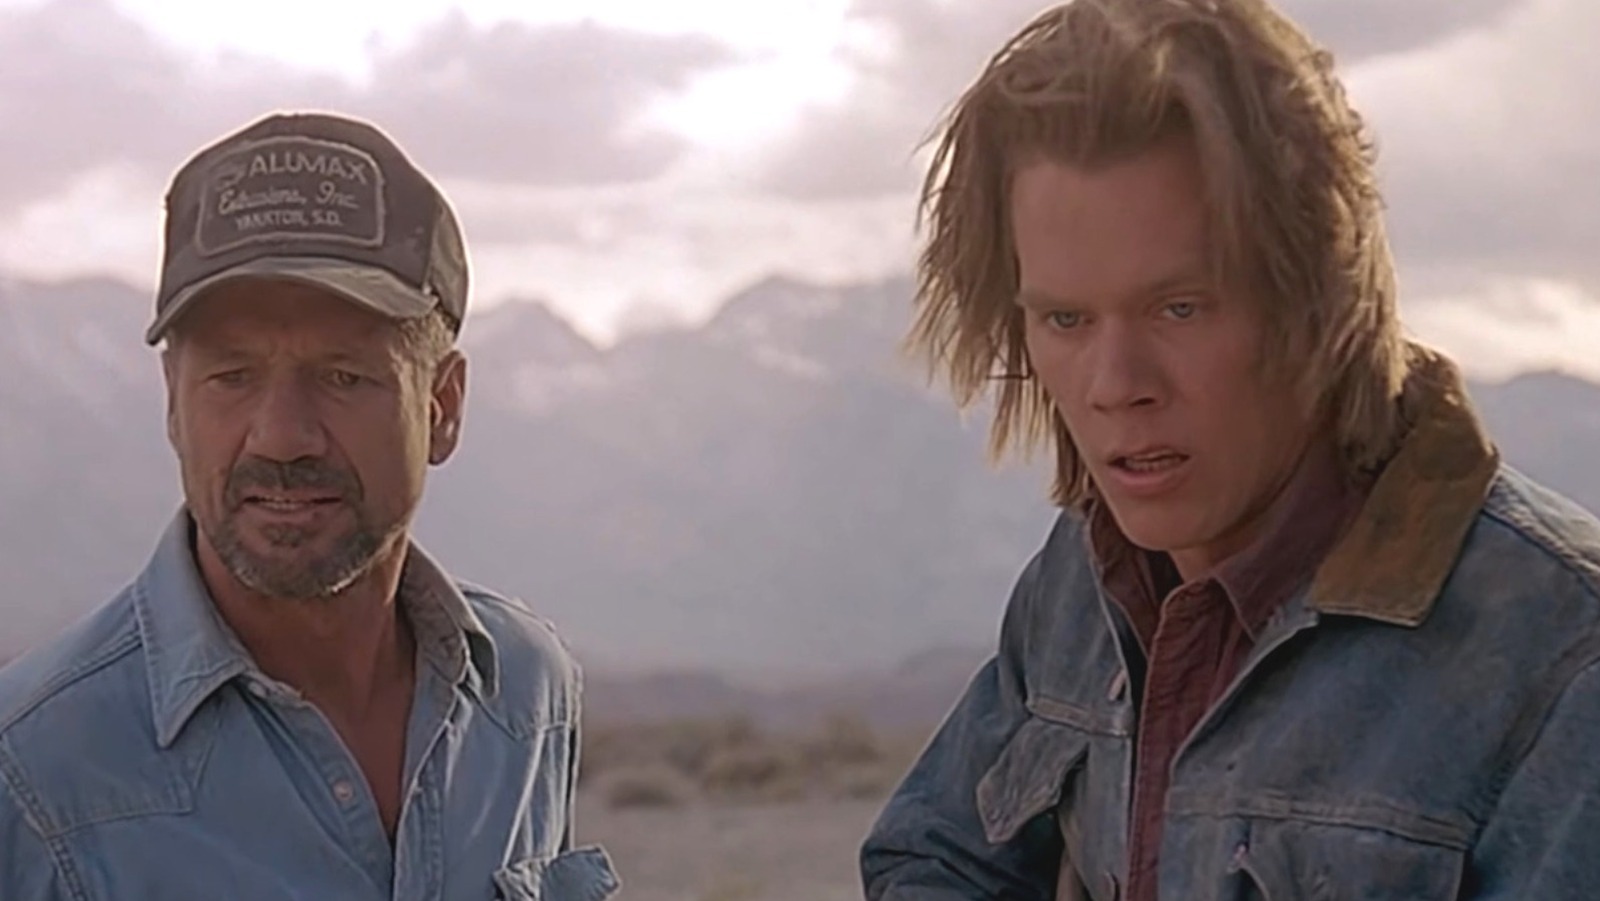 Tremors Planned For One VFX Scene The Crew Just Couldn't Pull Off